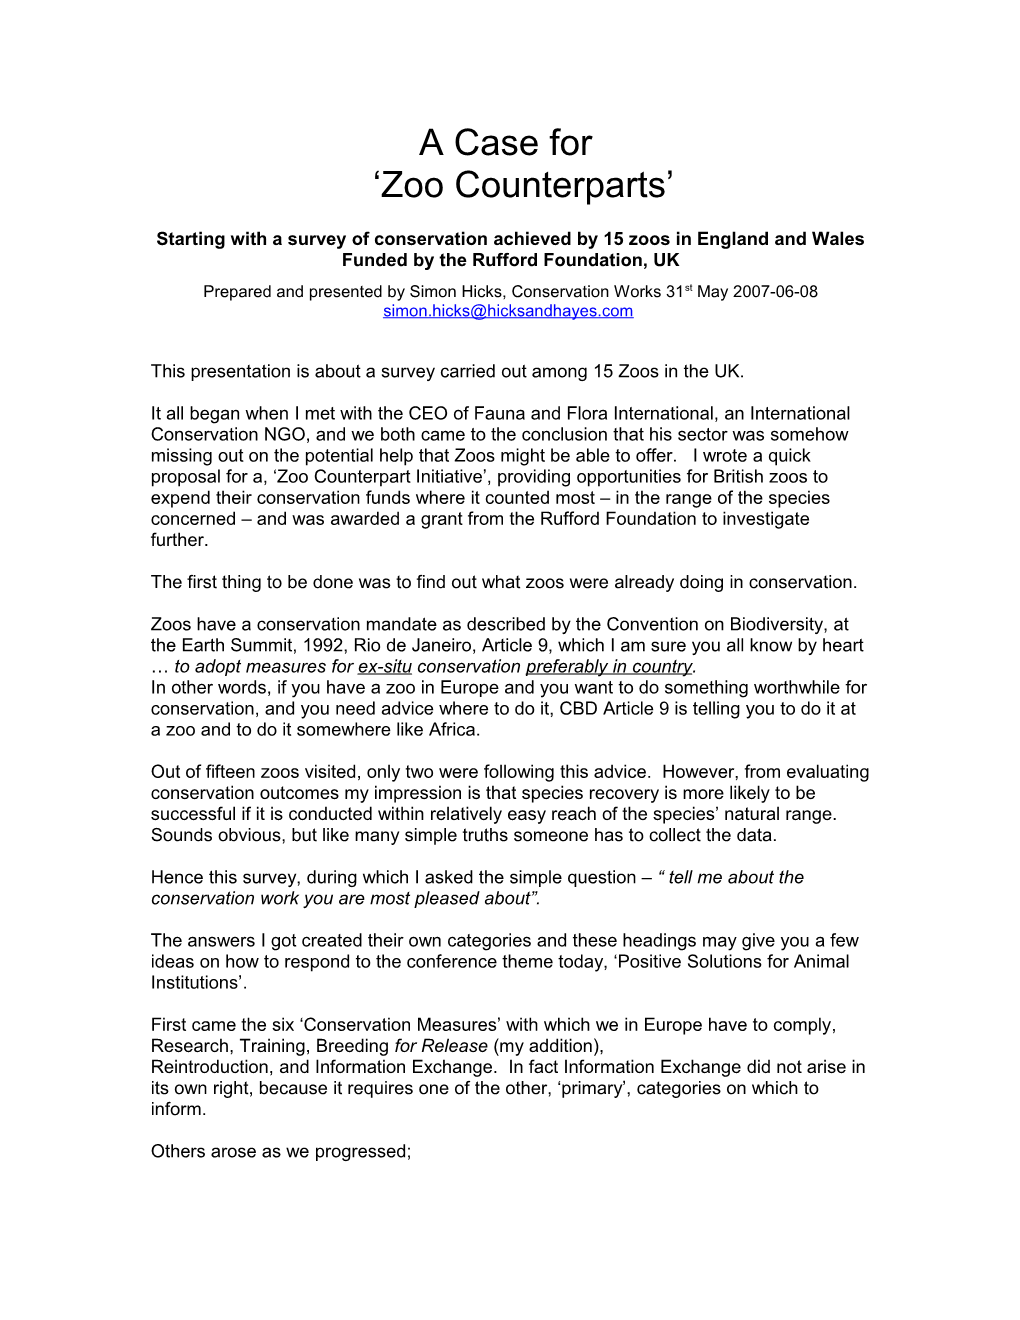 A Case for Zoo Counterparts